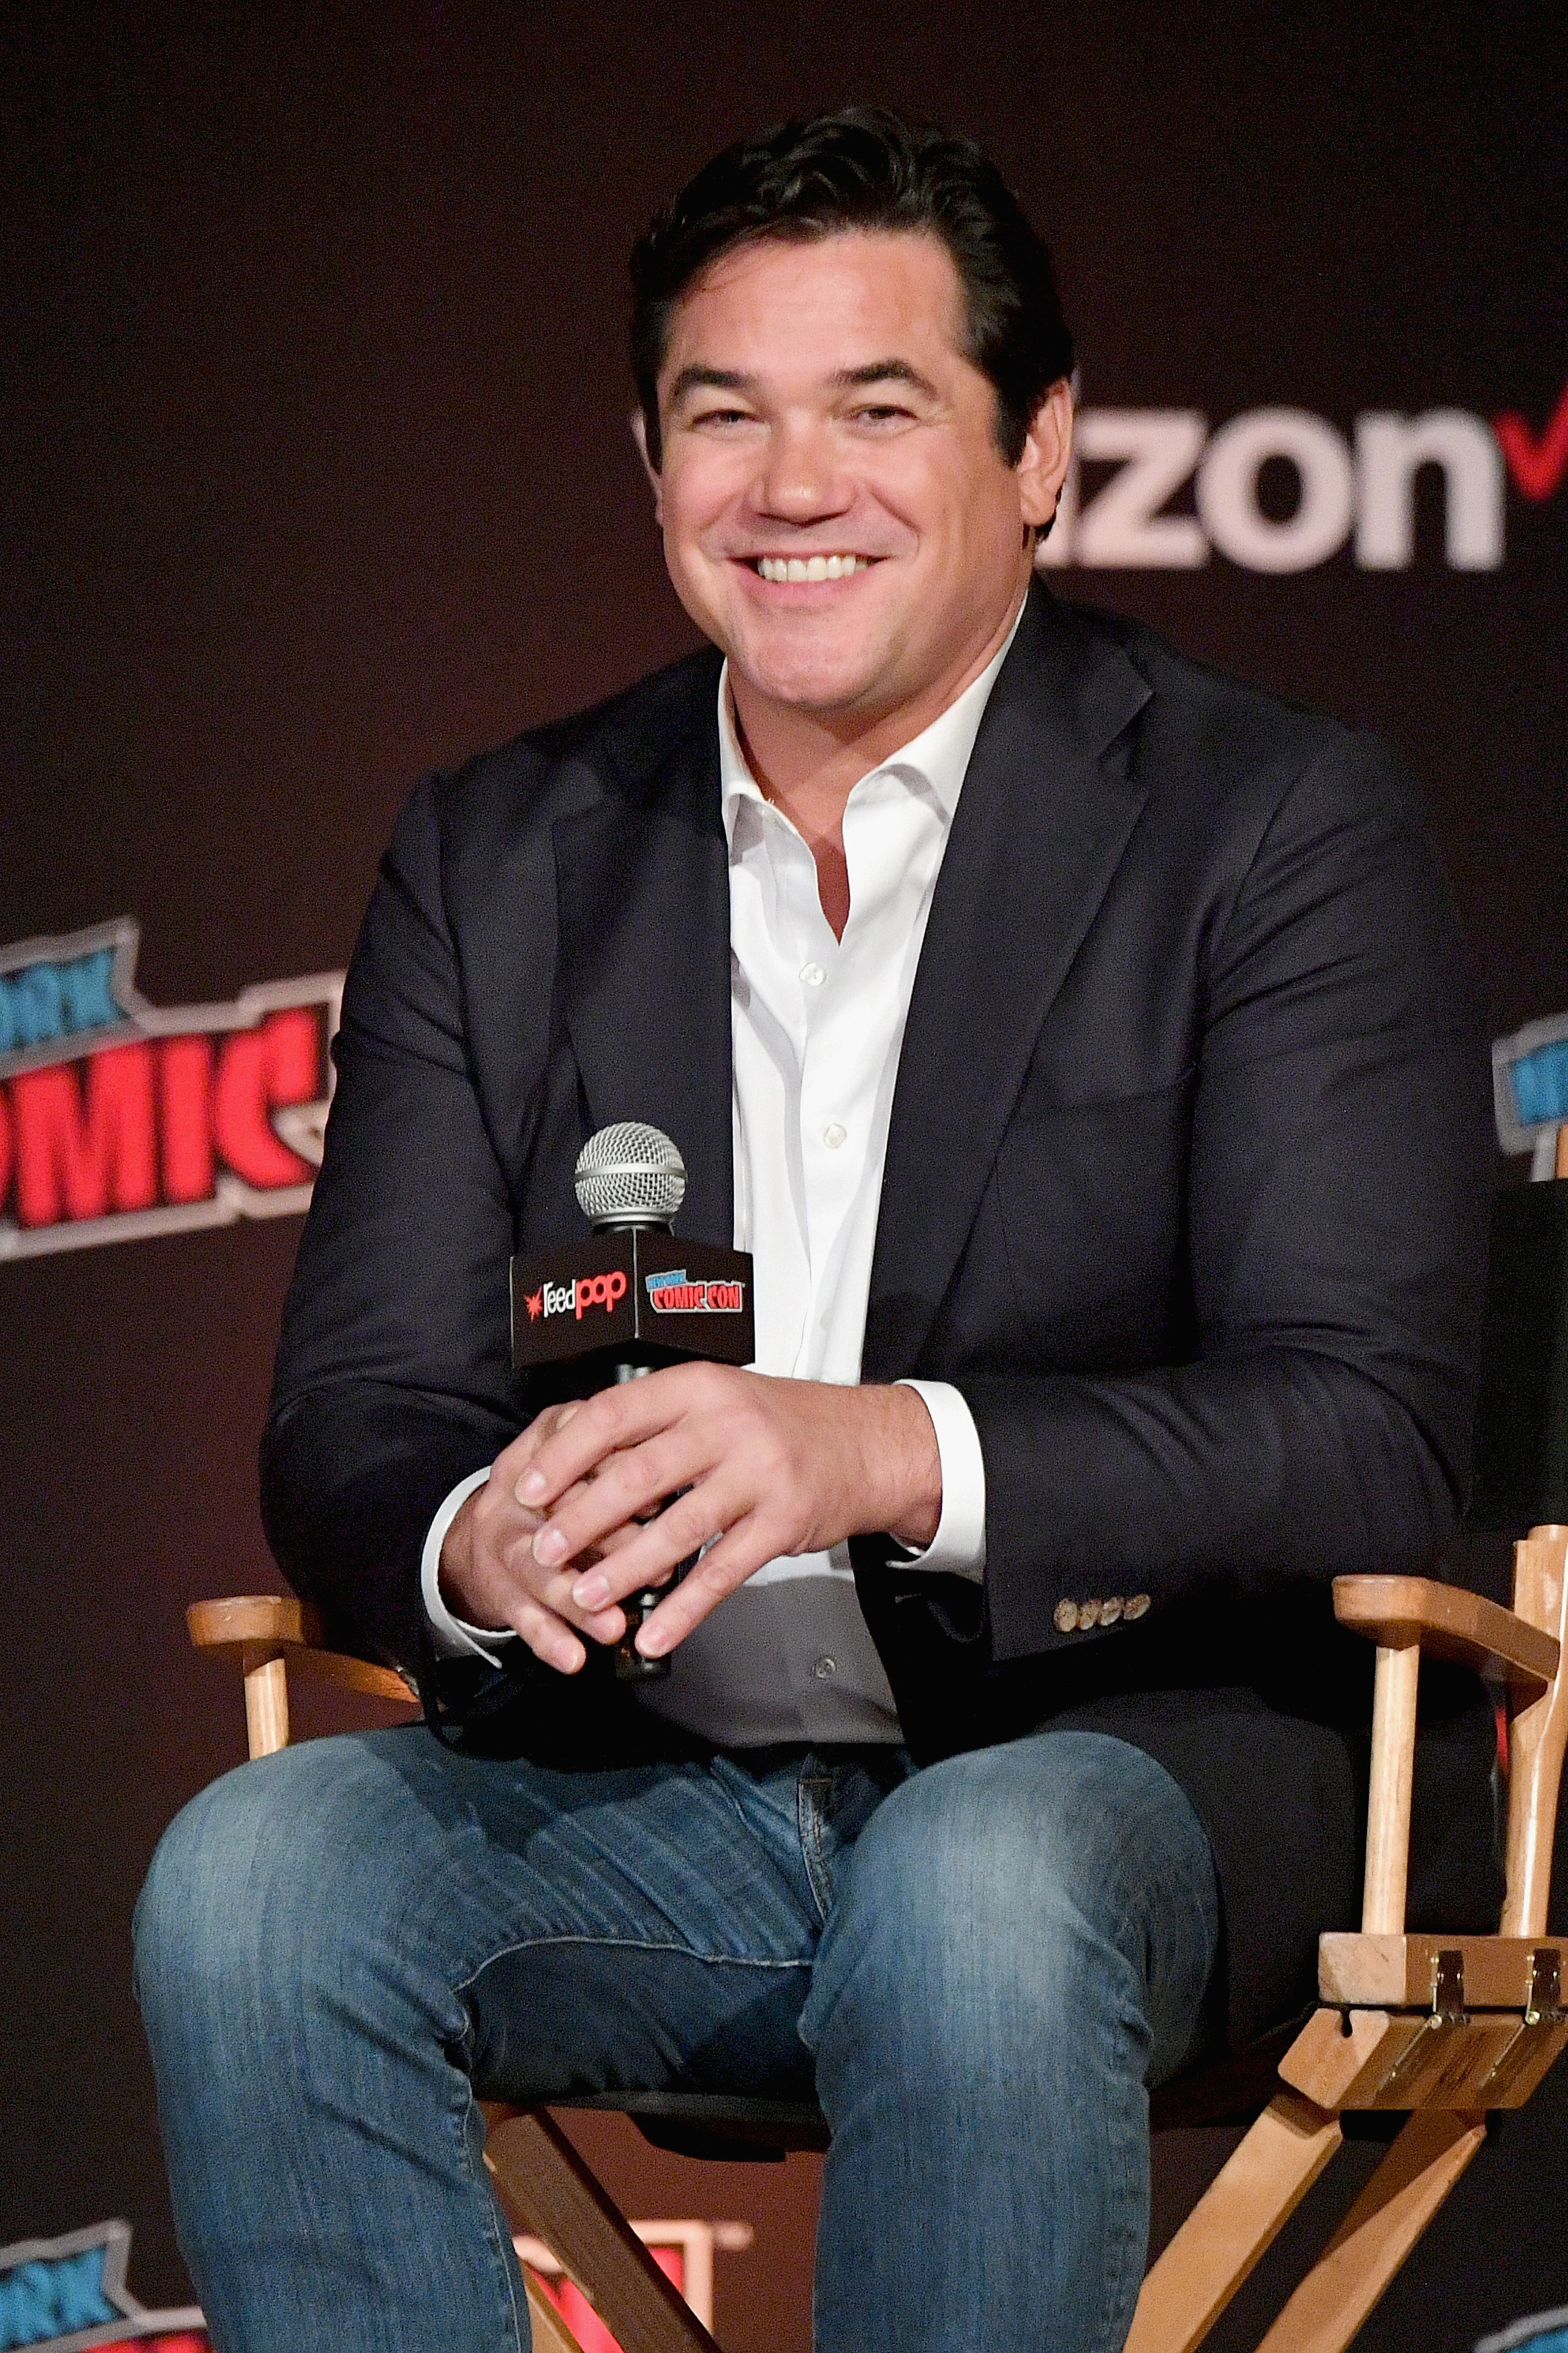 Dean sitting and taking questions at an event